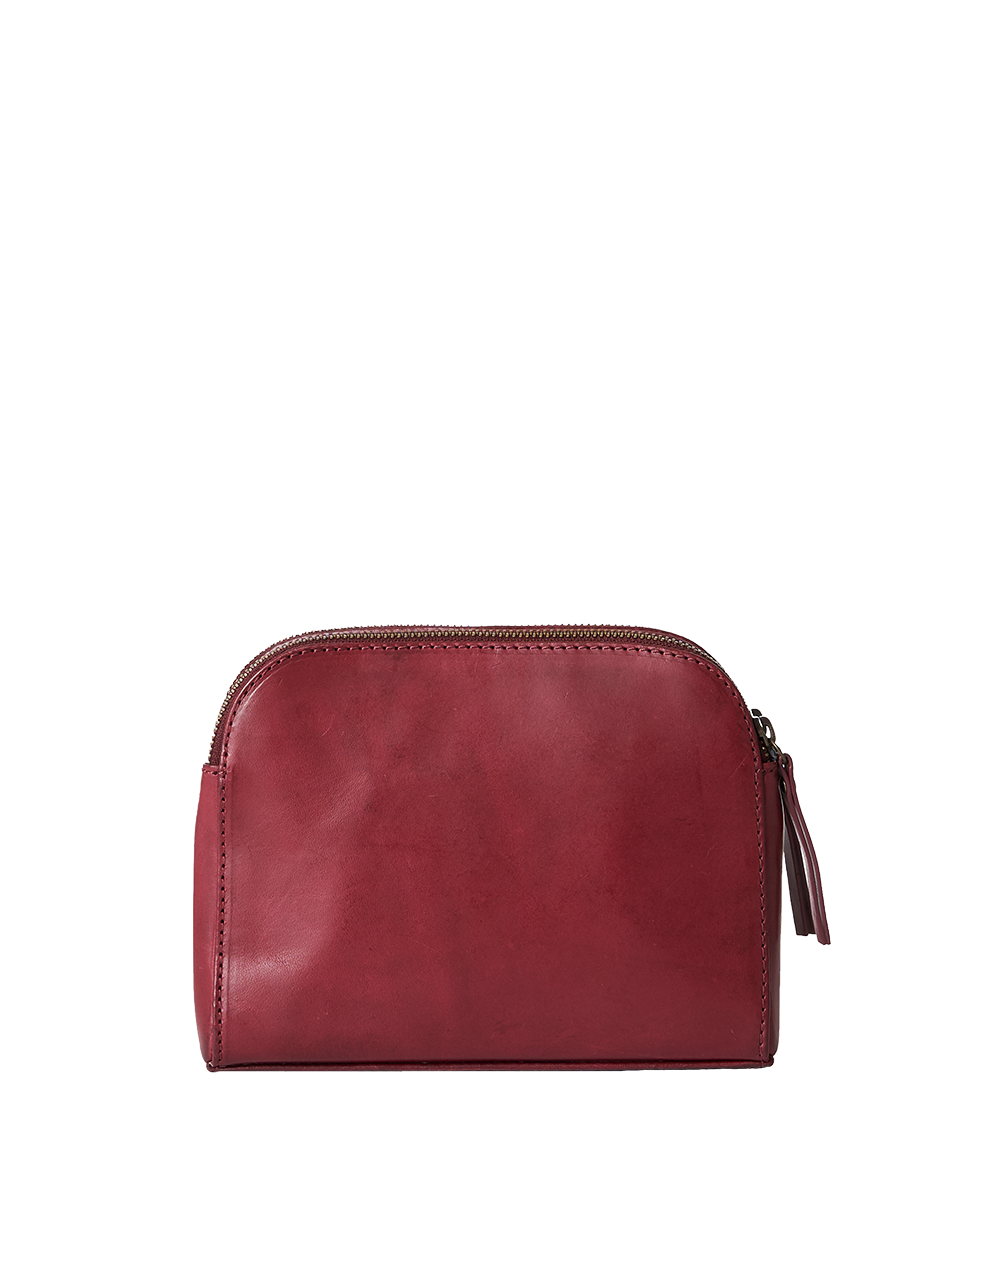 Ruby Leather womens handbag. Square shape with an adjustable leather & chain strap. Back product image.